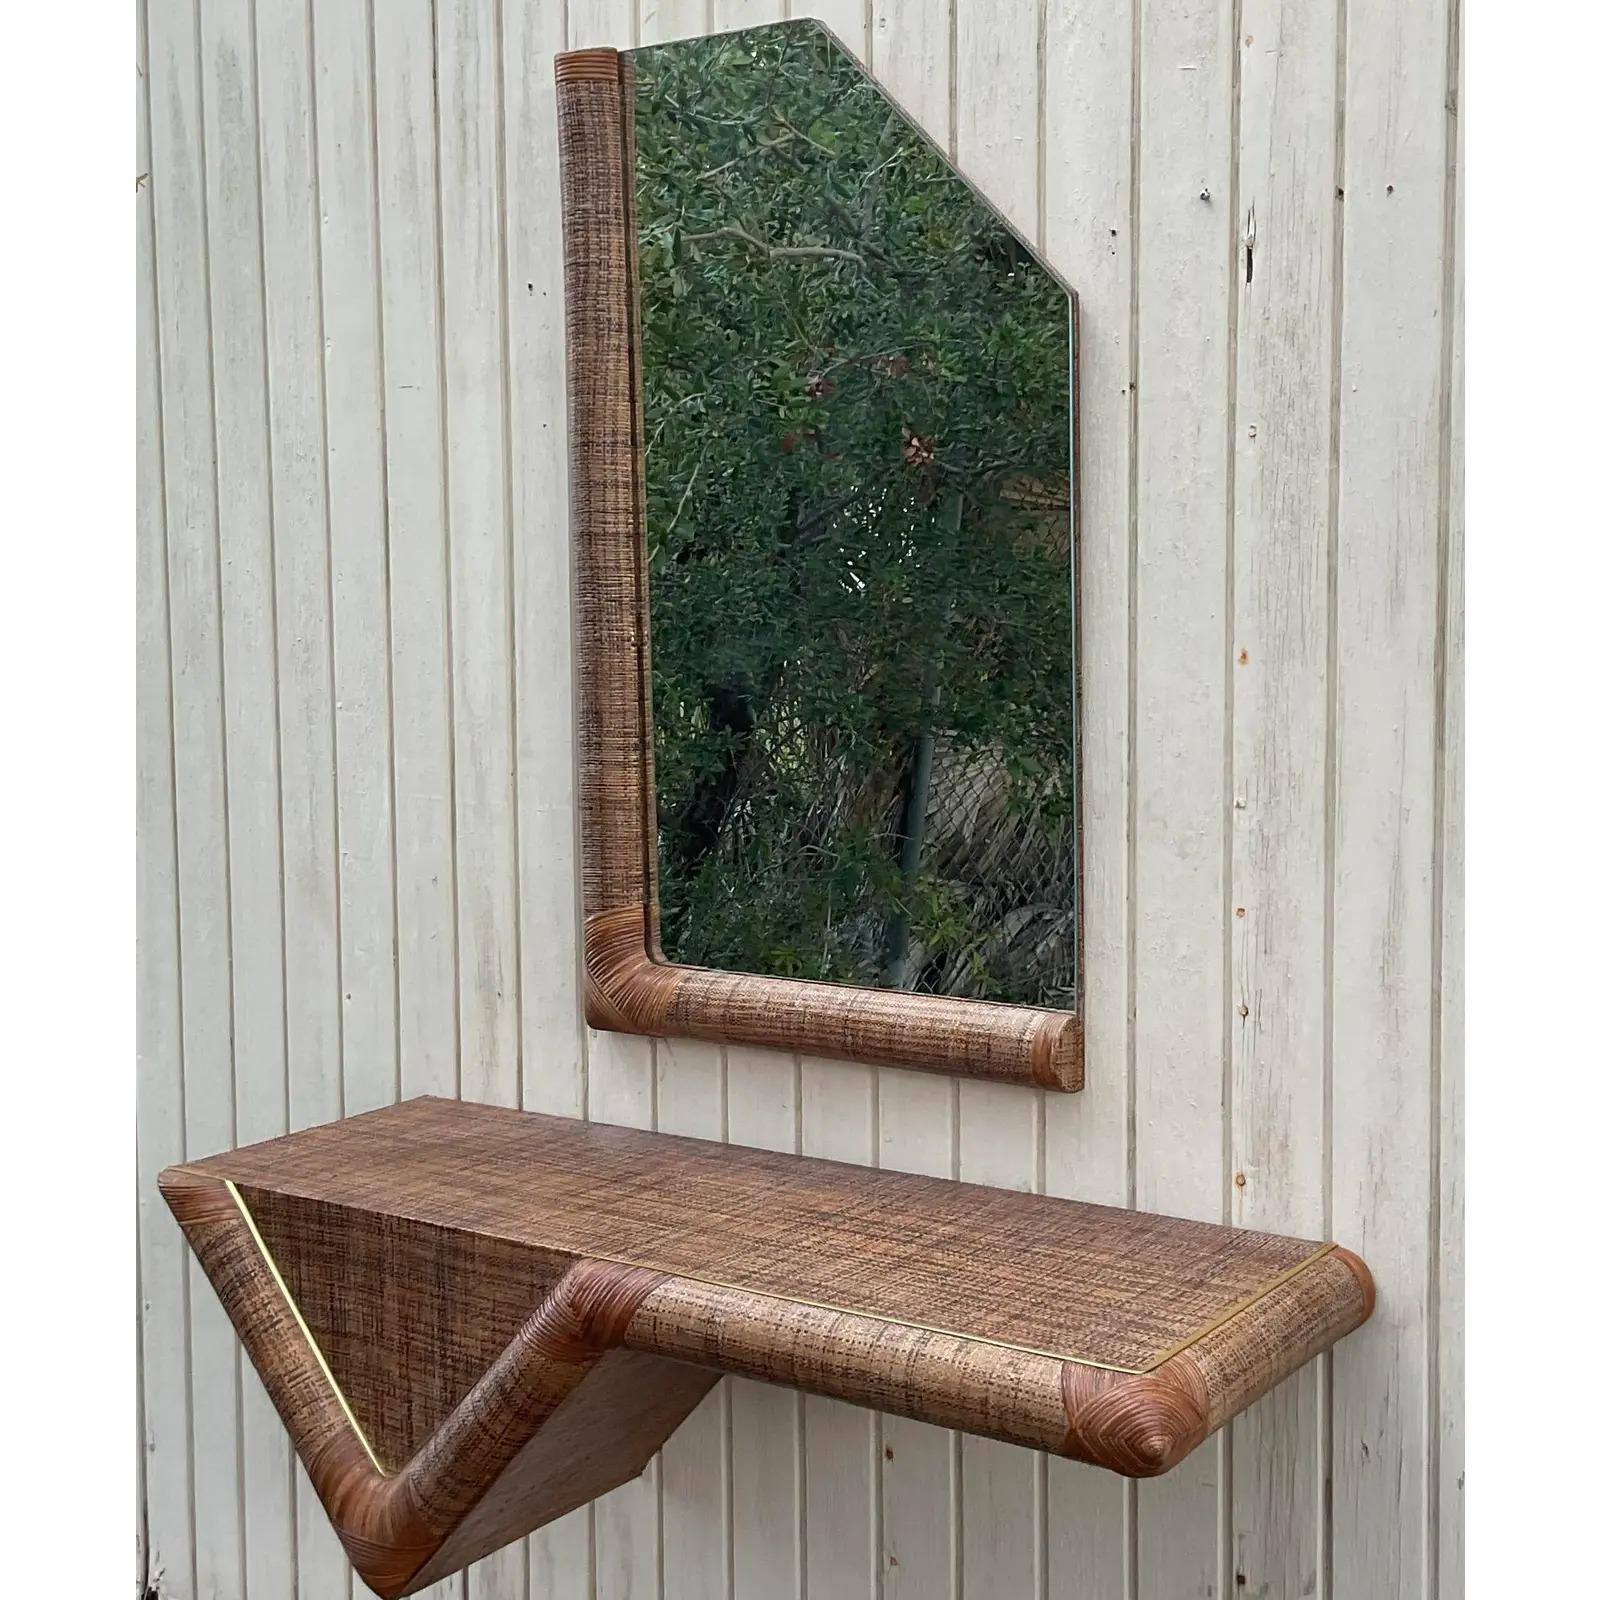 A fantastic vintage console table and mirror. Both pieces have the distinctive look made popular by Karl Springer. A chic Grasscloth finish with thin hair wrapped rattan edges. Acquired from a Miami estate.

Mirror dimensions - 25 x 42.